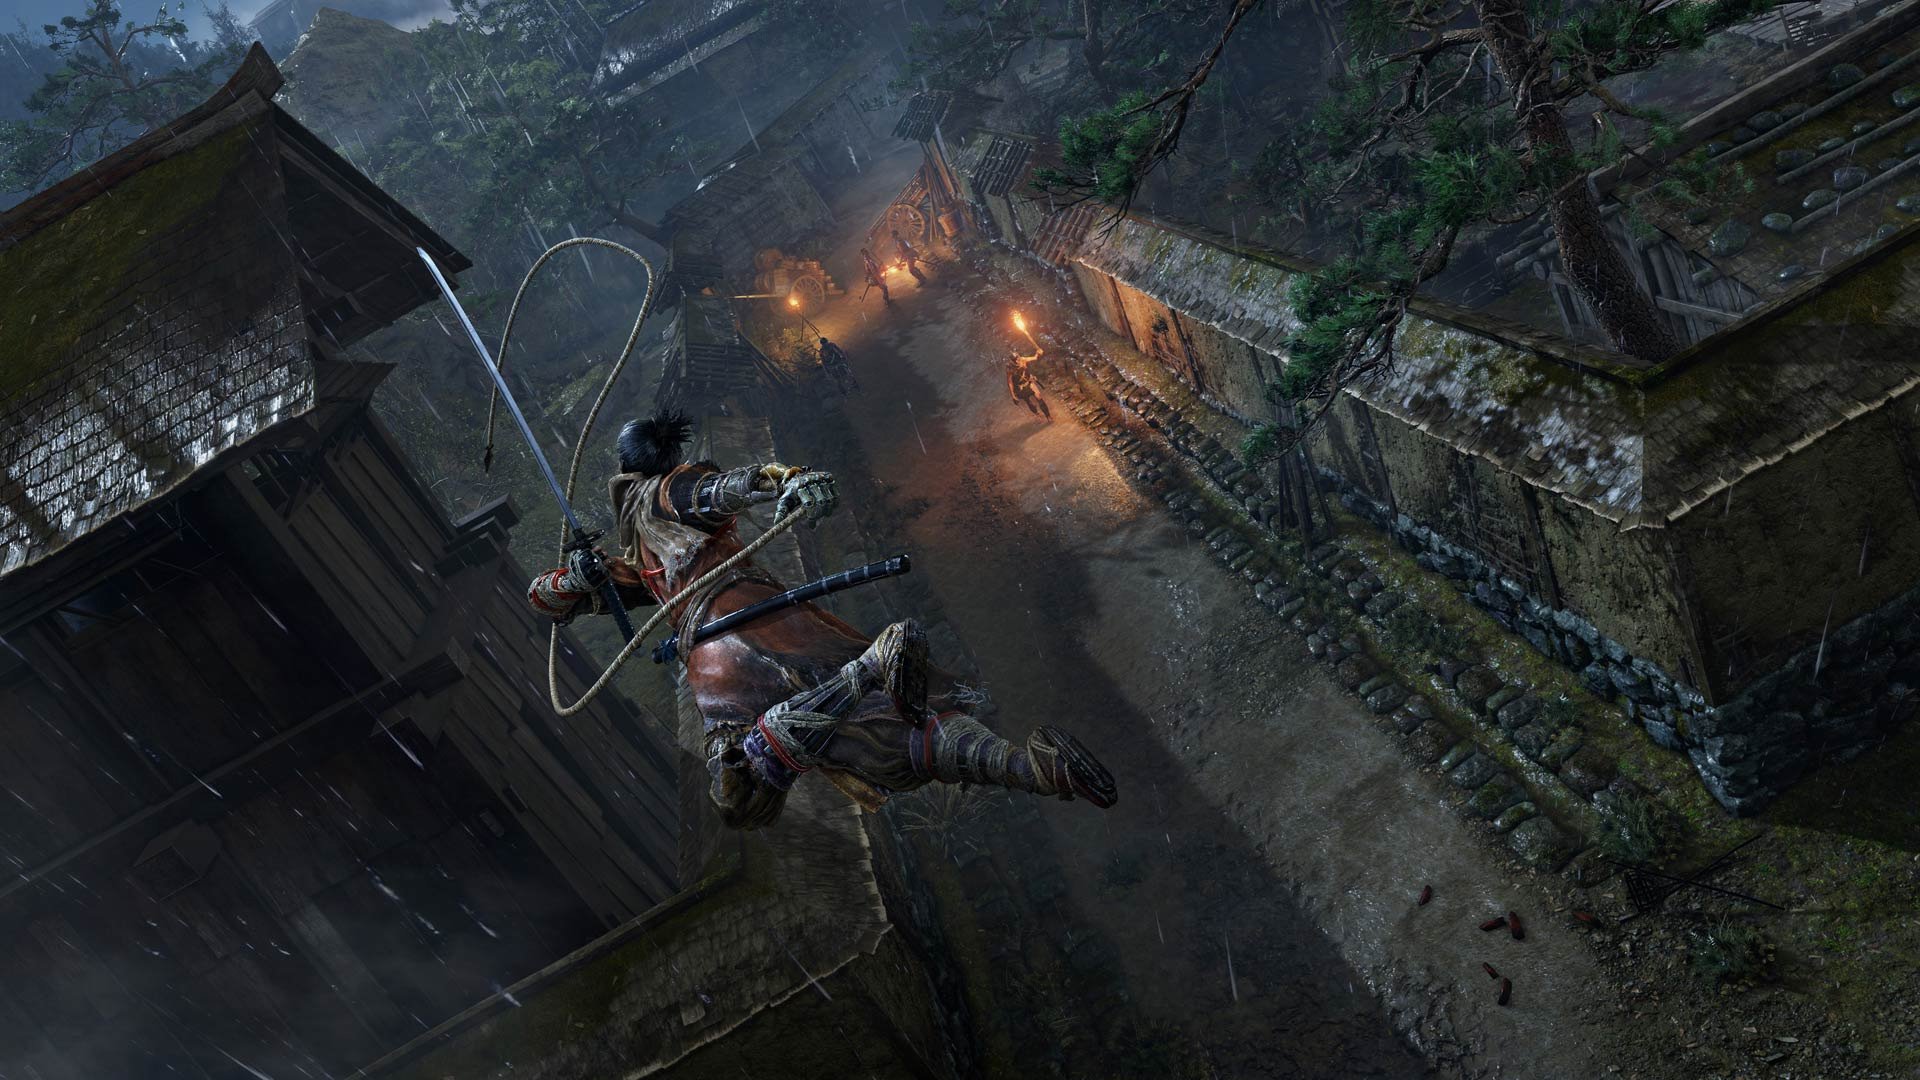 Hirata Estate is an okay starting point on your XP and gold farming journey in Sekiro